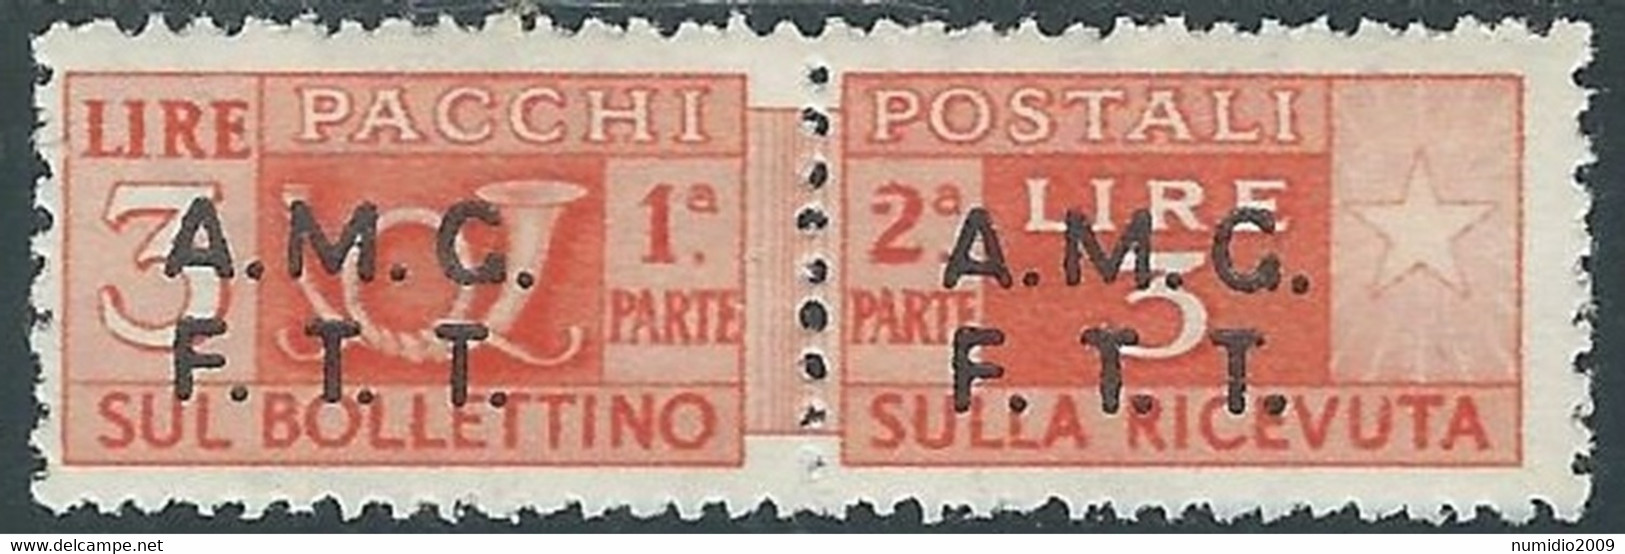 1947-48 TRIESTE A PACCHI POSTALI 3 LIRE MH * - RE25-4 - Postal And Consigned Parcels